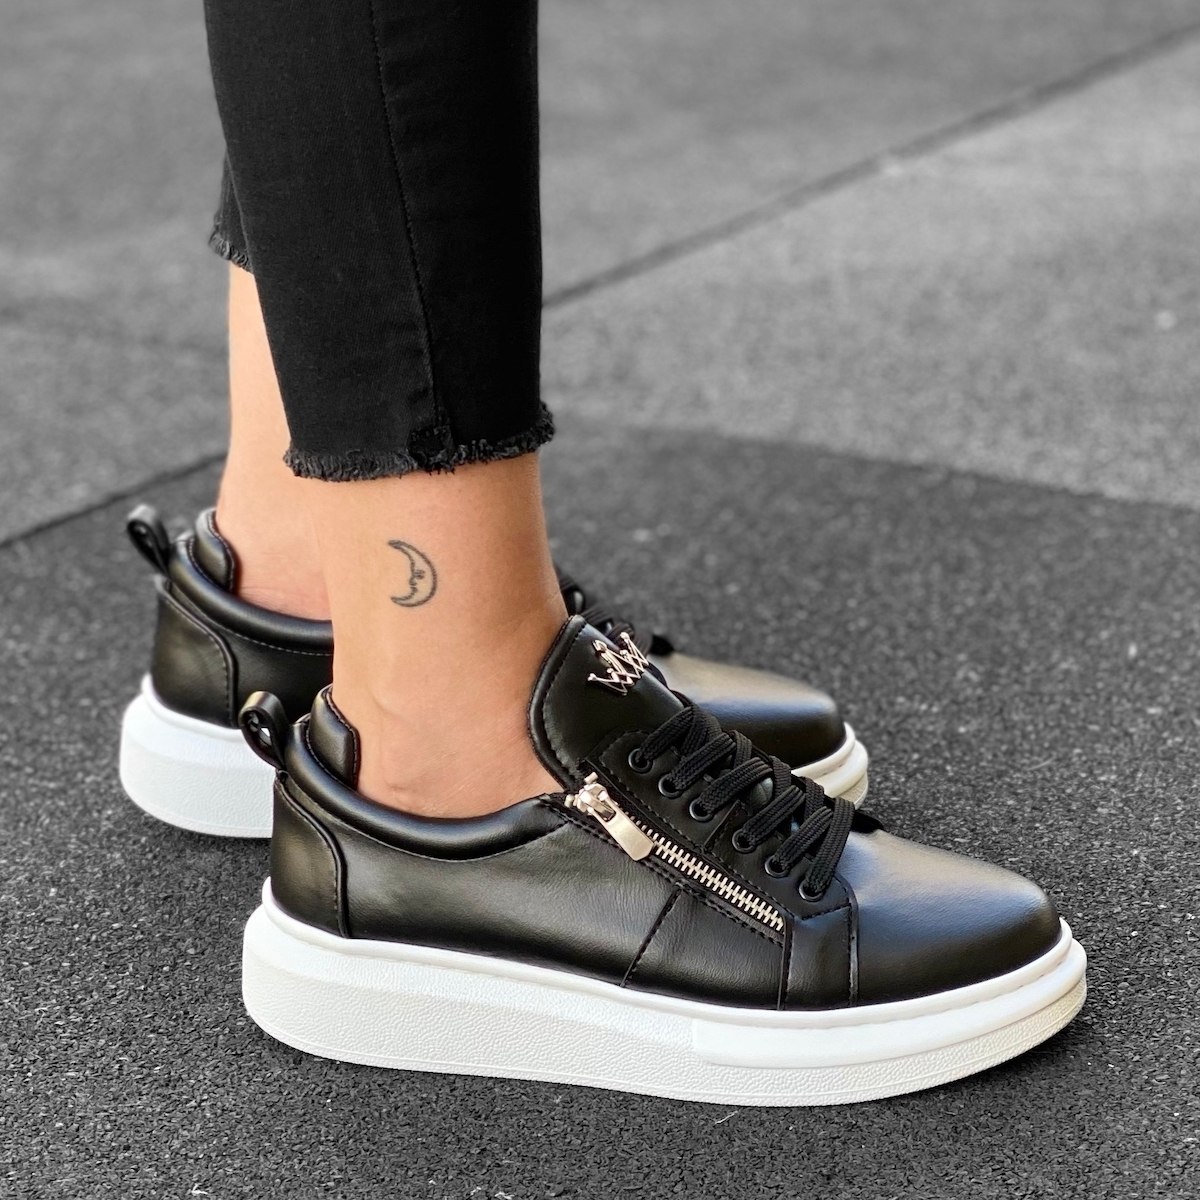 Woman's Hype Sole Zipped Style Sneakers in Black-White - 2